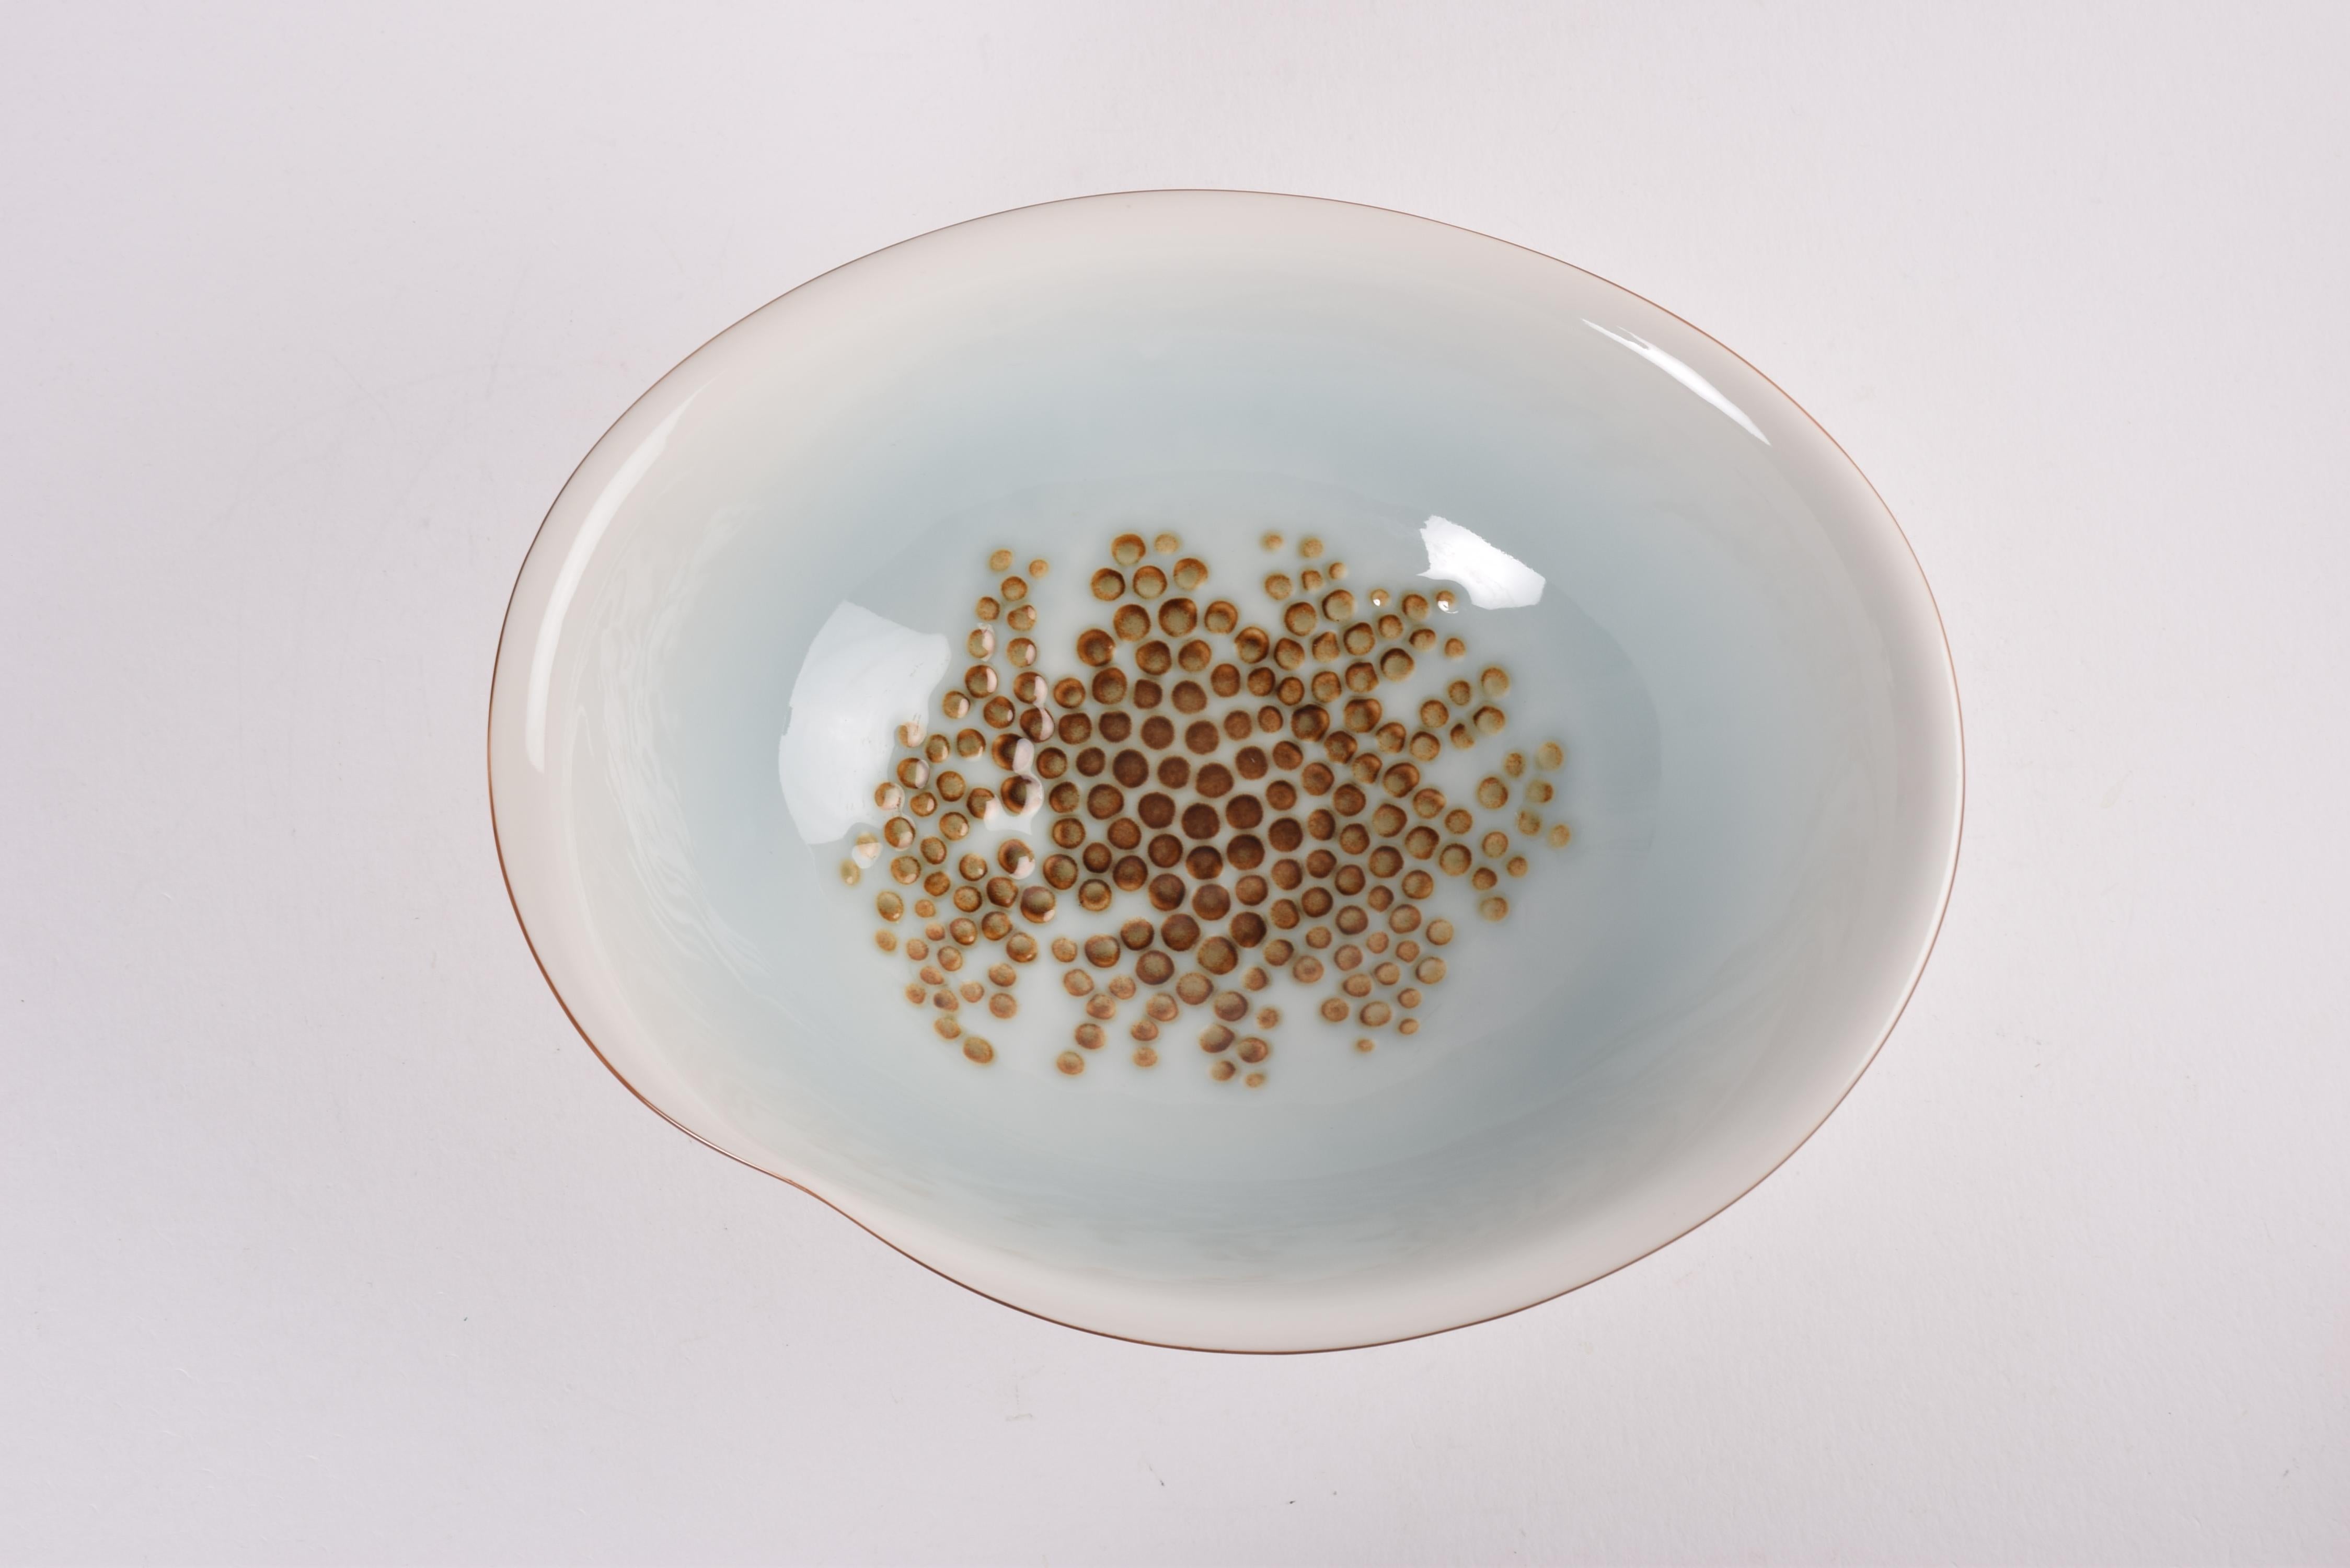 Vintage Royal Copenhagen Gallery limited edition bowl by Anne Marie Trolle, ca 1980s to 1990s.

Very large ceramic bowl with amorphous shape accentuated by a thin brown line around the rim. The bottom of the bowl has a raised decor of brown dots